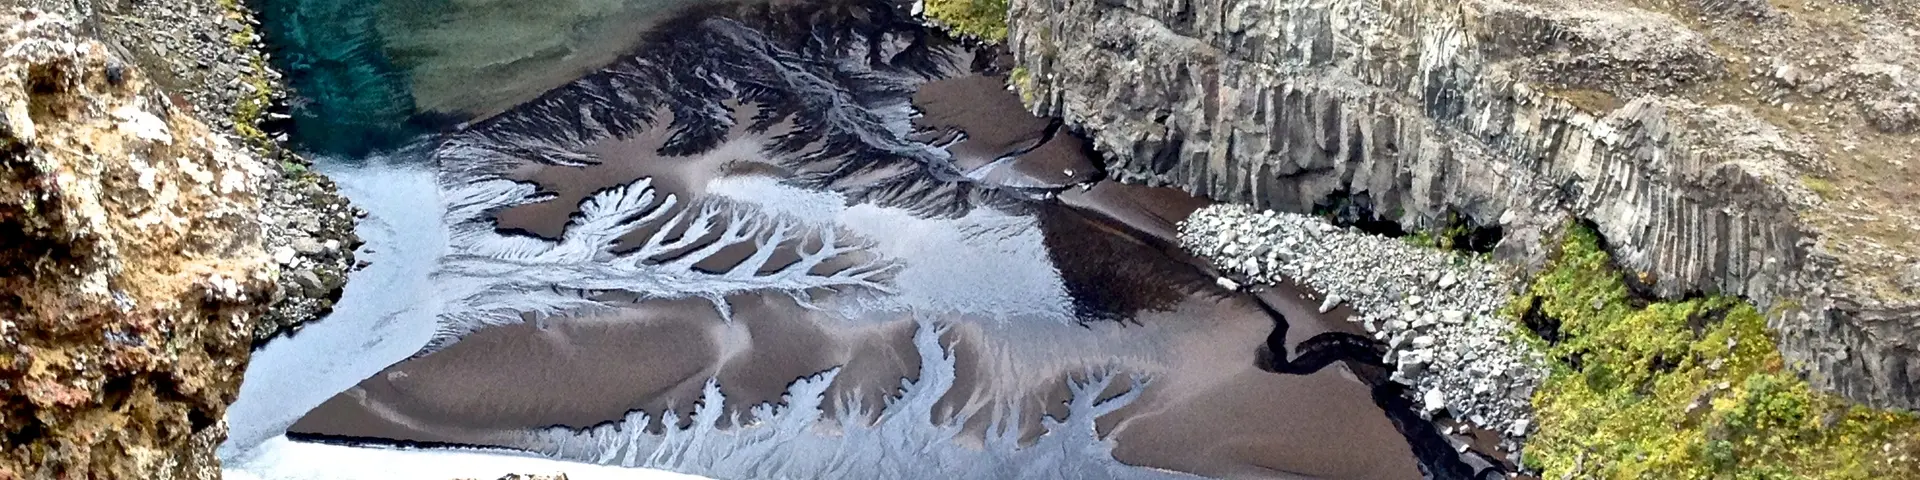 Flood discharge patterns on the volcanic sand of the Jökulsá Canyon in Fjöllum, Iceland